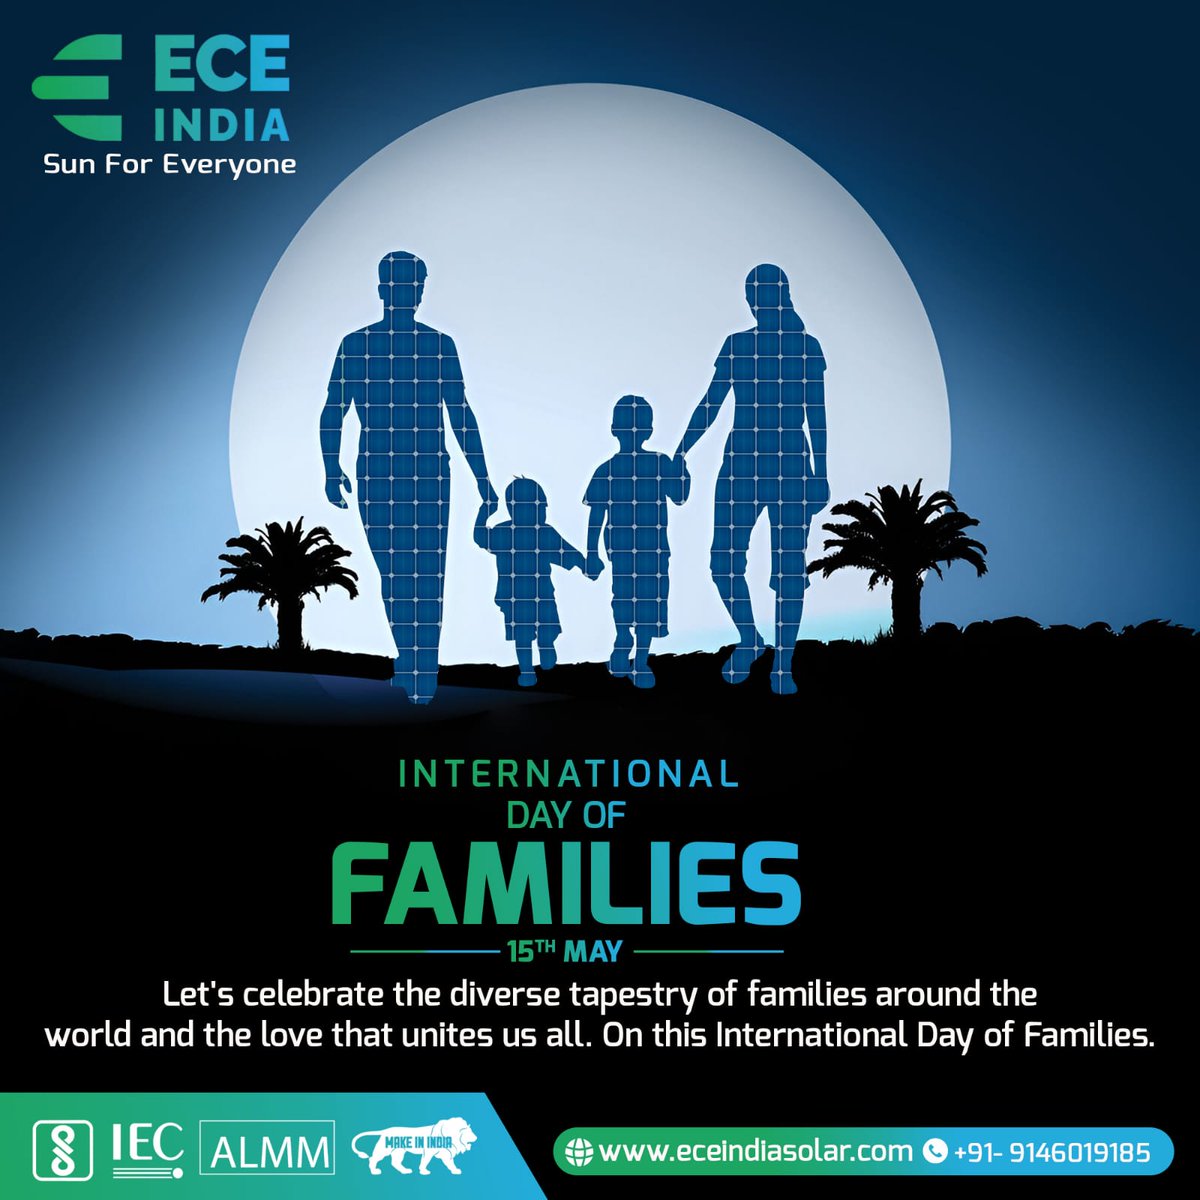 On this international day of families let's celebrate the diverse tapestry of families around the world and the love that unites us all.

#eceindia #eceindiaenergy #sunforeveryone #families #solarpanel #renewableenergy #InternationalDayofFamilies #makeinindia